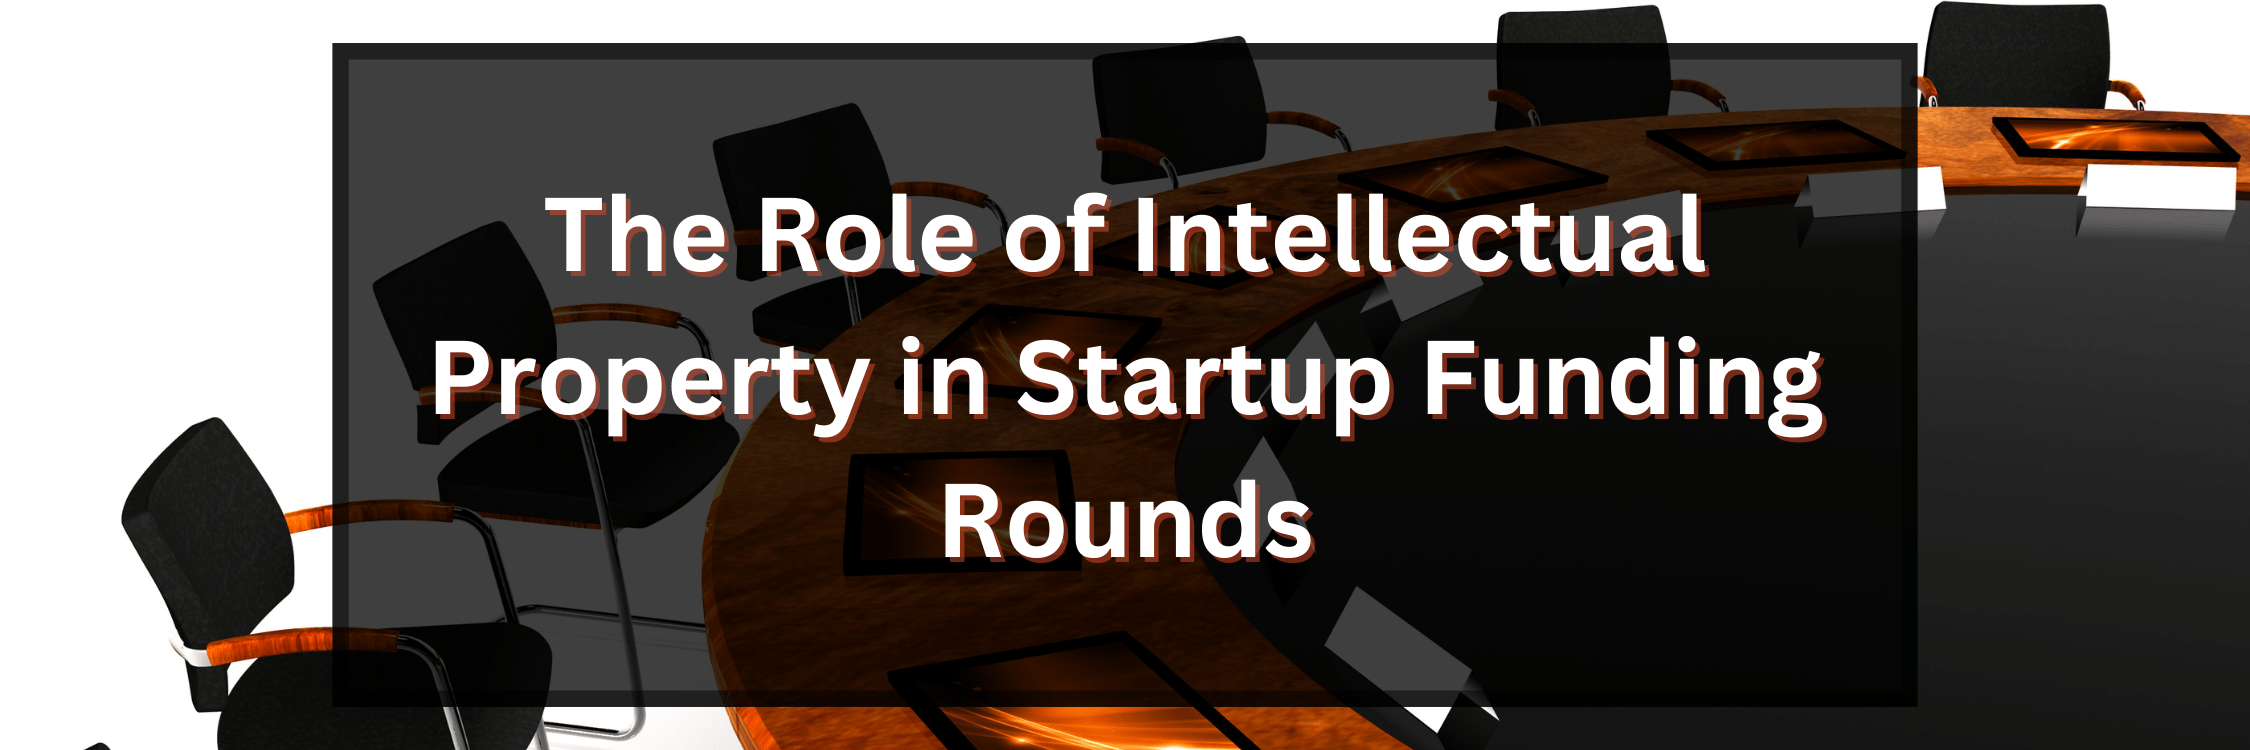 The Role Of Intellectual Property In Startup Funding Rounds